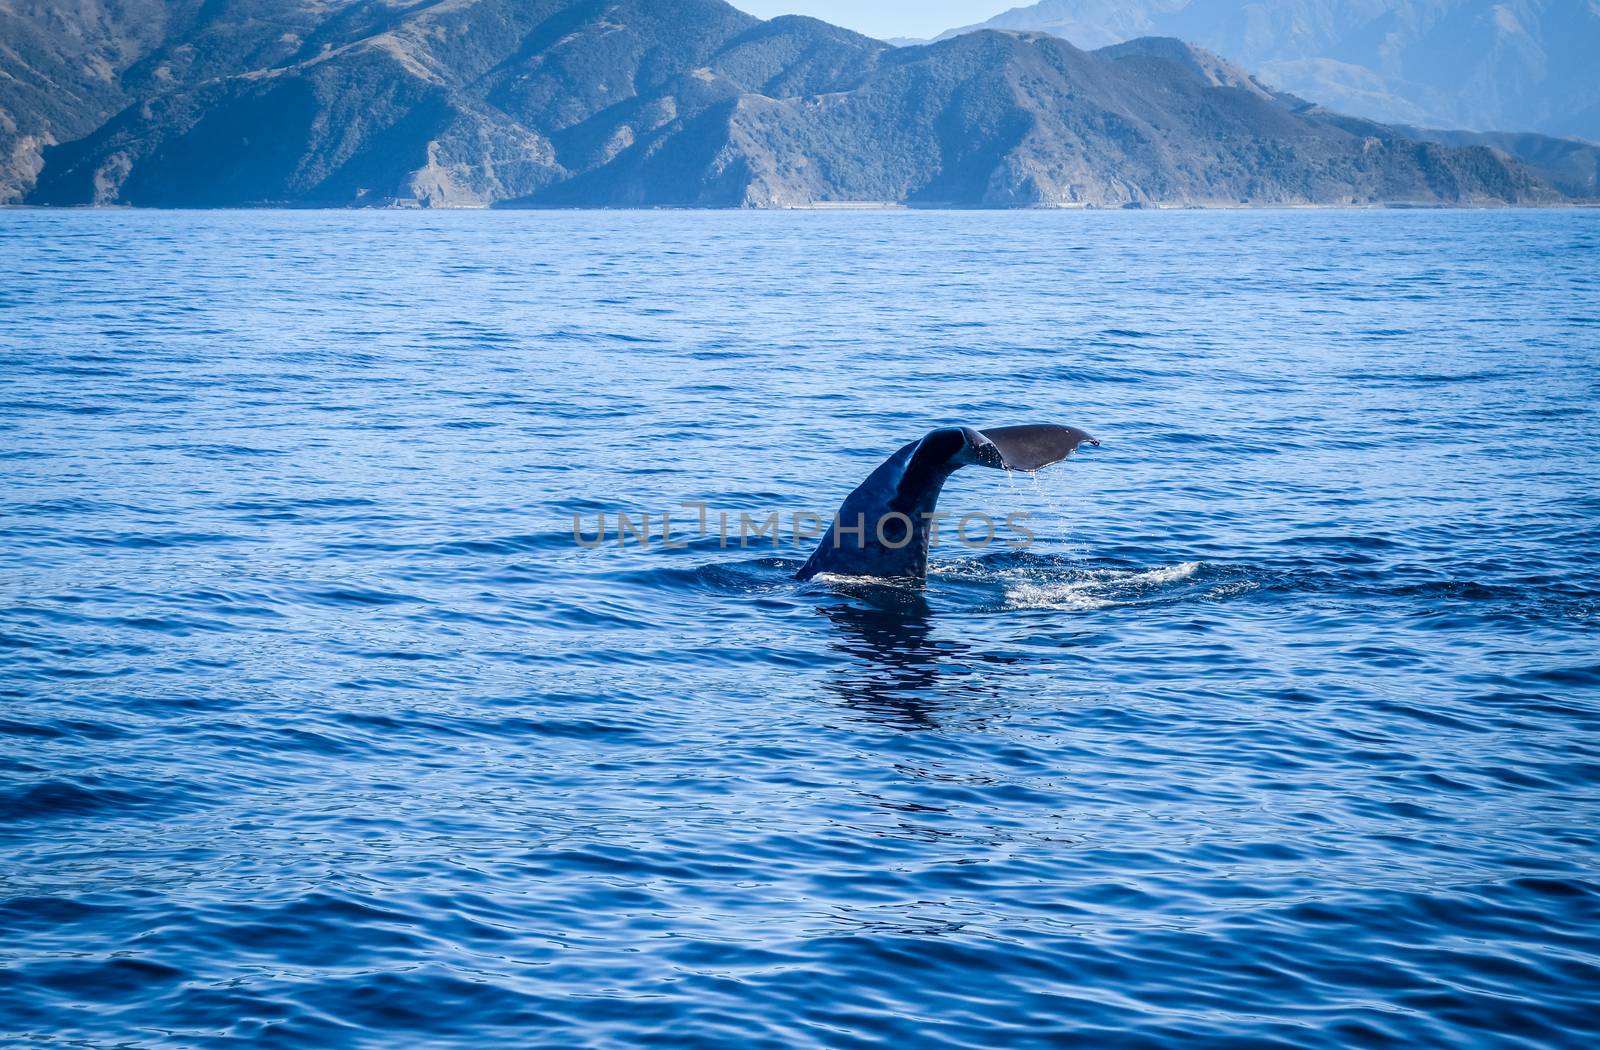 Whale in Kaikoura bay, New Zealand by daboost